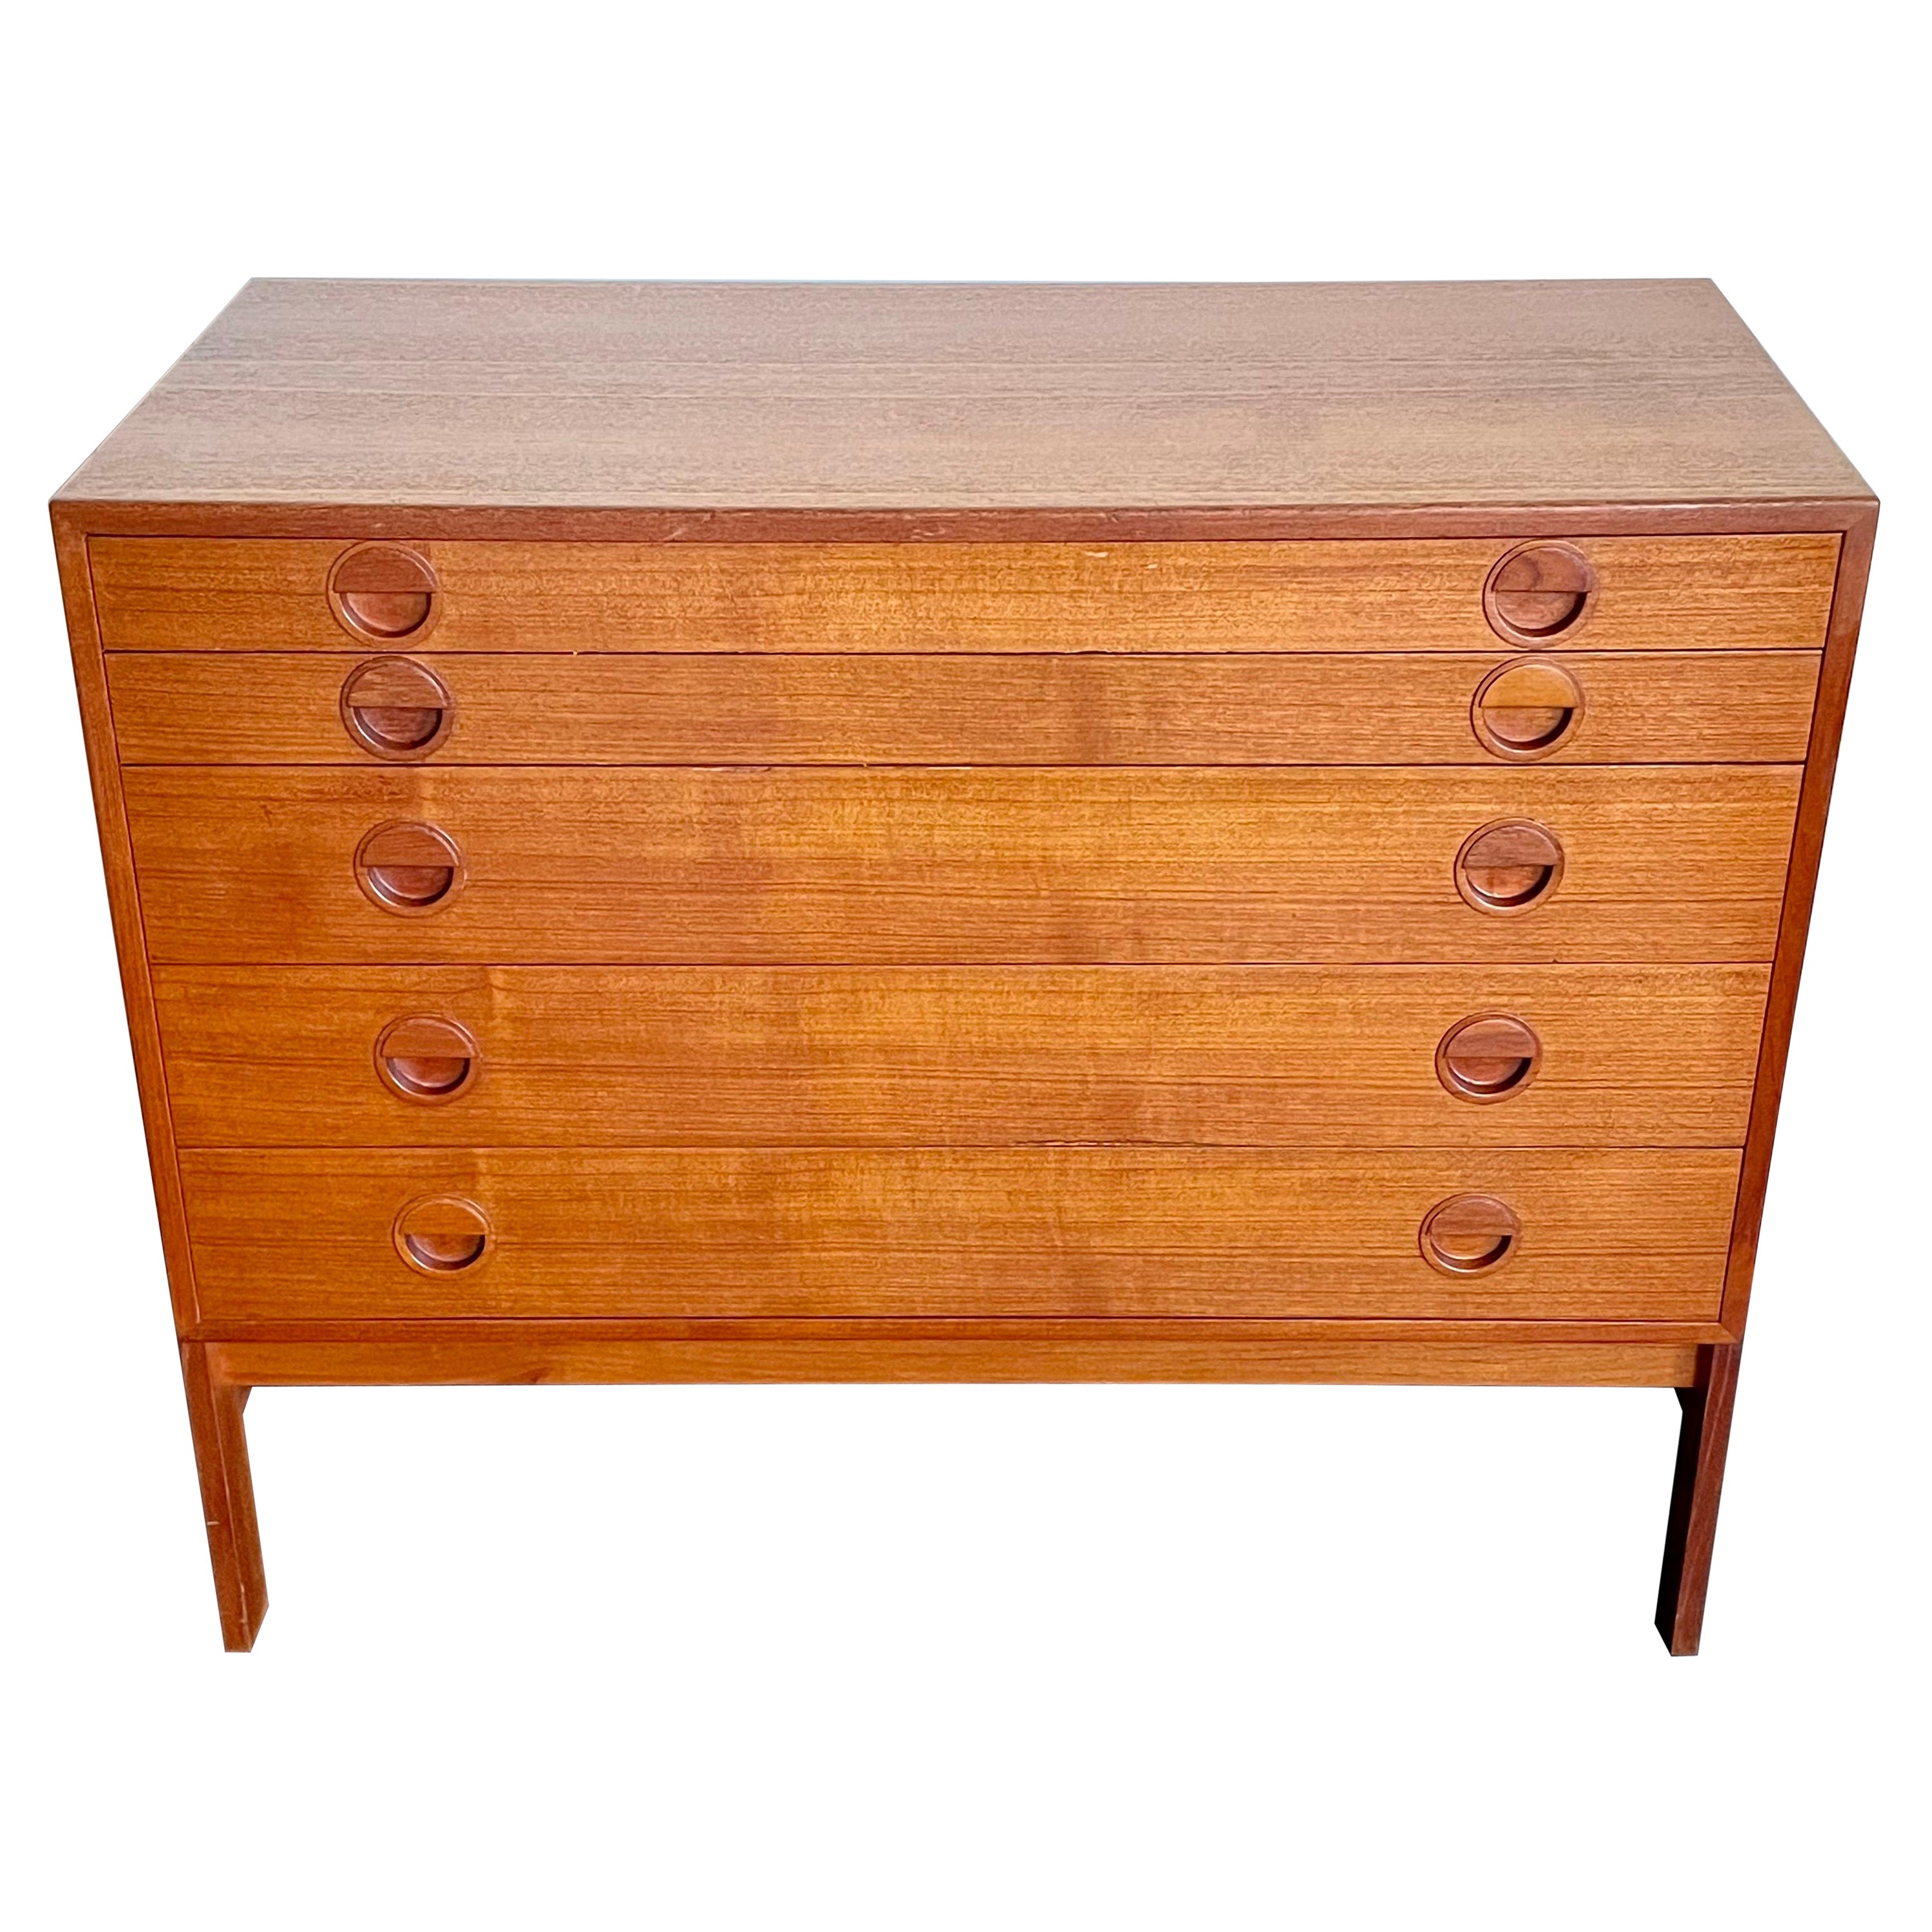 Mid Century Small Danish Teak Sideboard, Five Drawers for Flatware and Linens